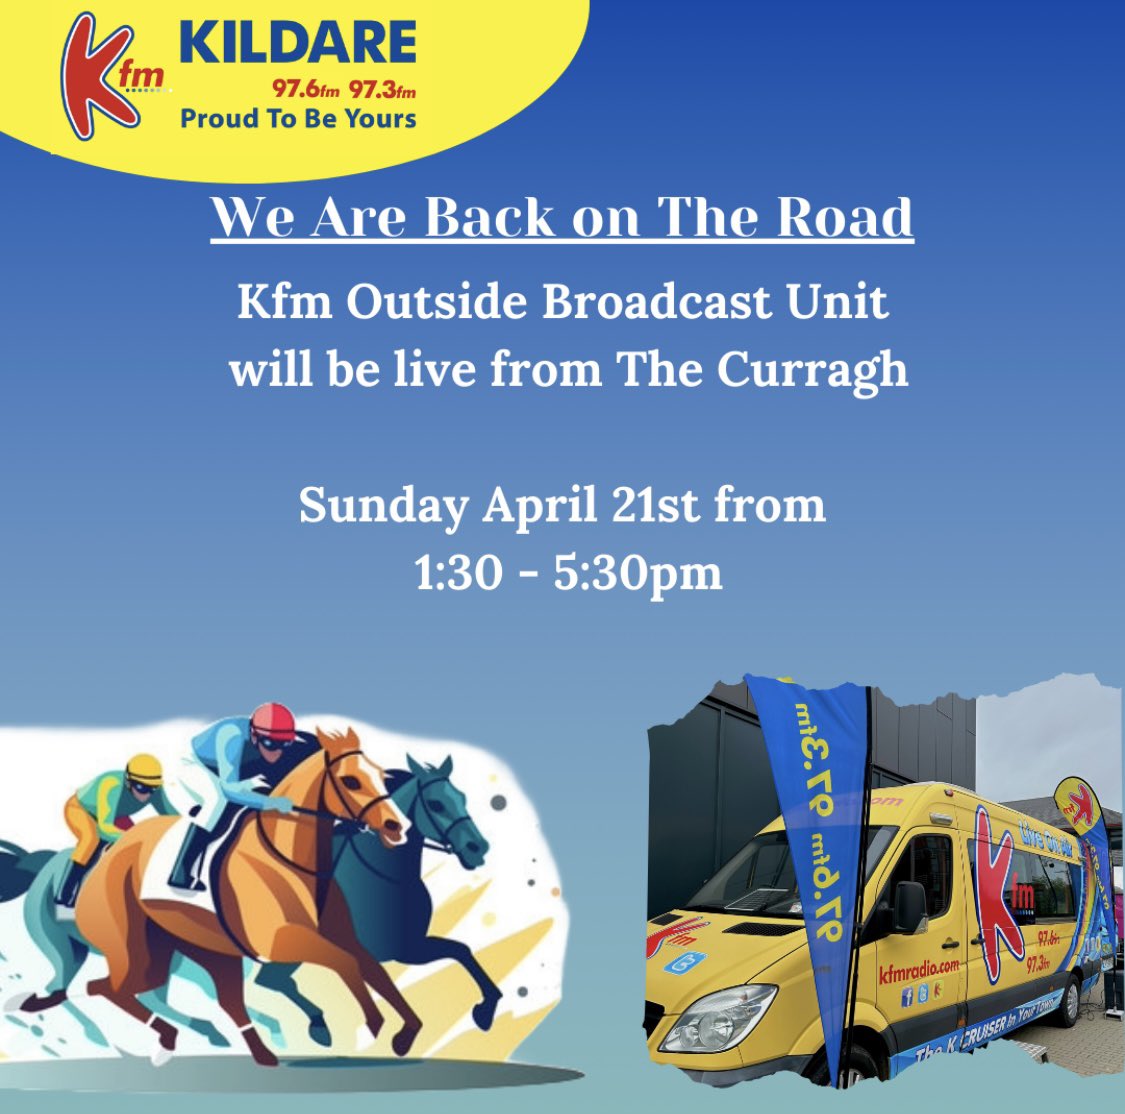 Looking forward to Newbridge Parishes Community Race Day tomorrow with @PPowerofficial and @EoinBeattyKfm